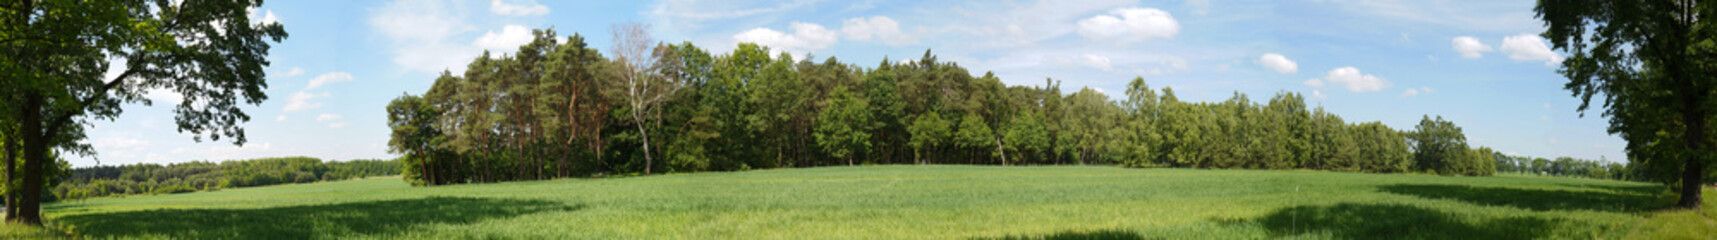 A small forest among farmland-panorama.